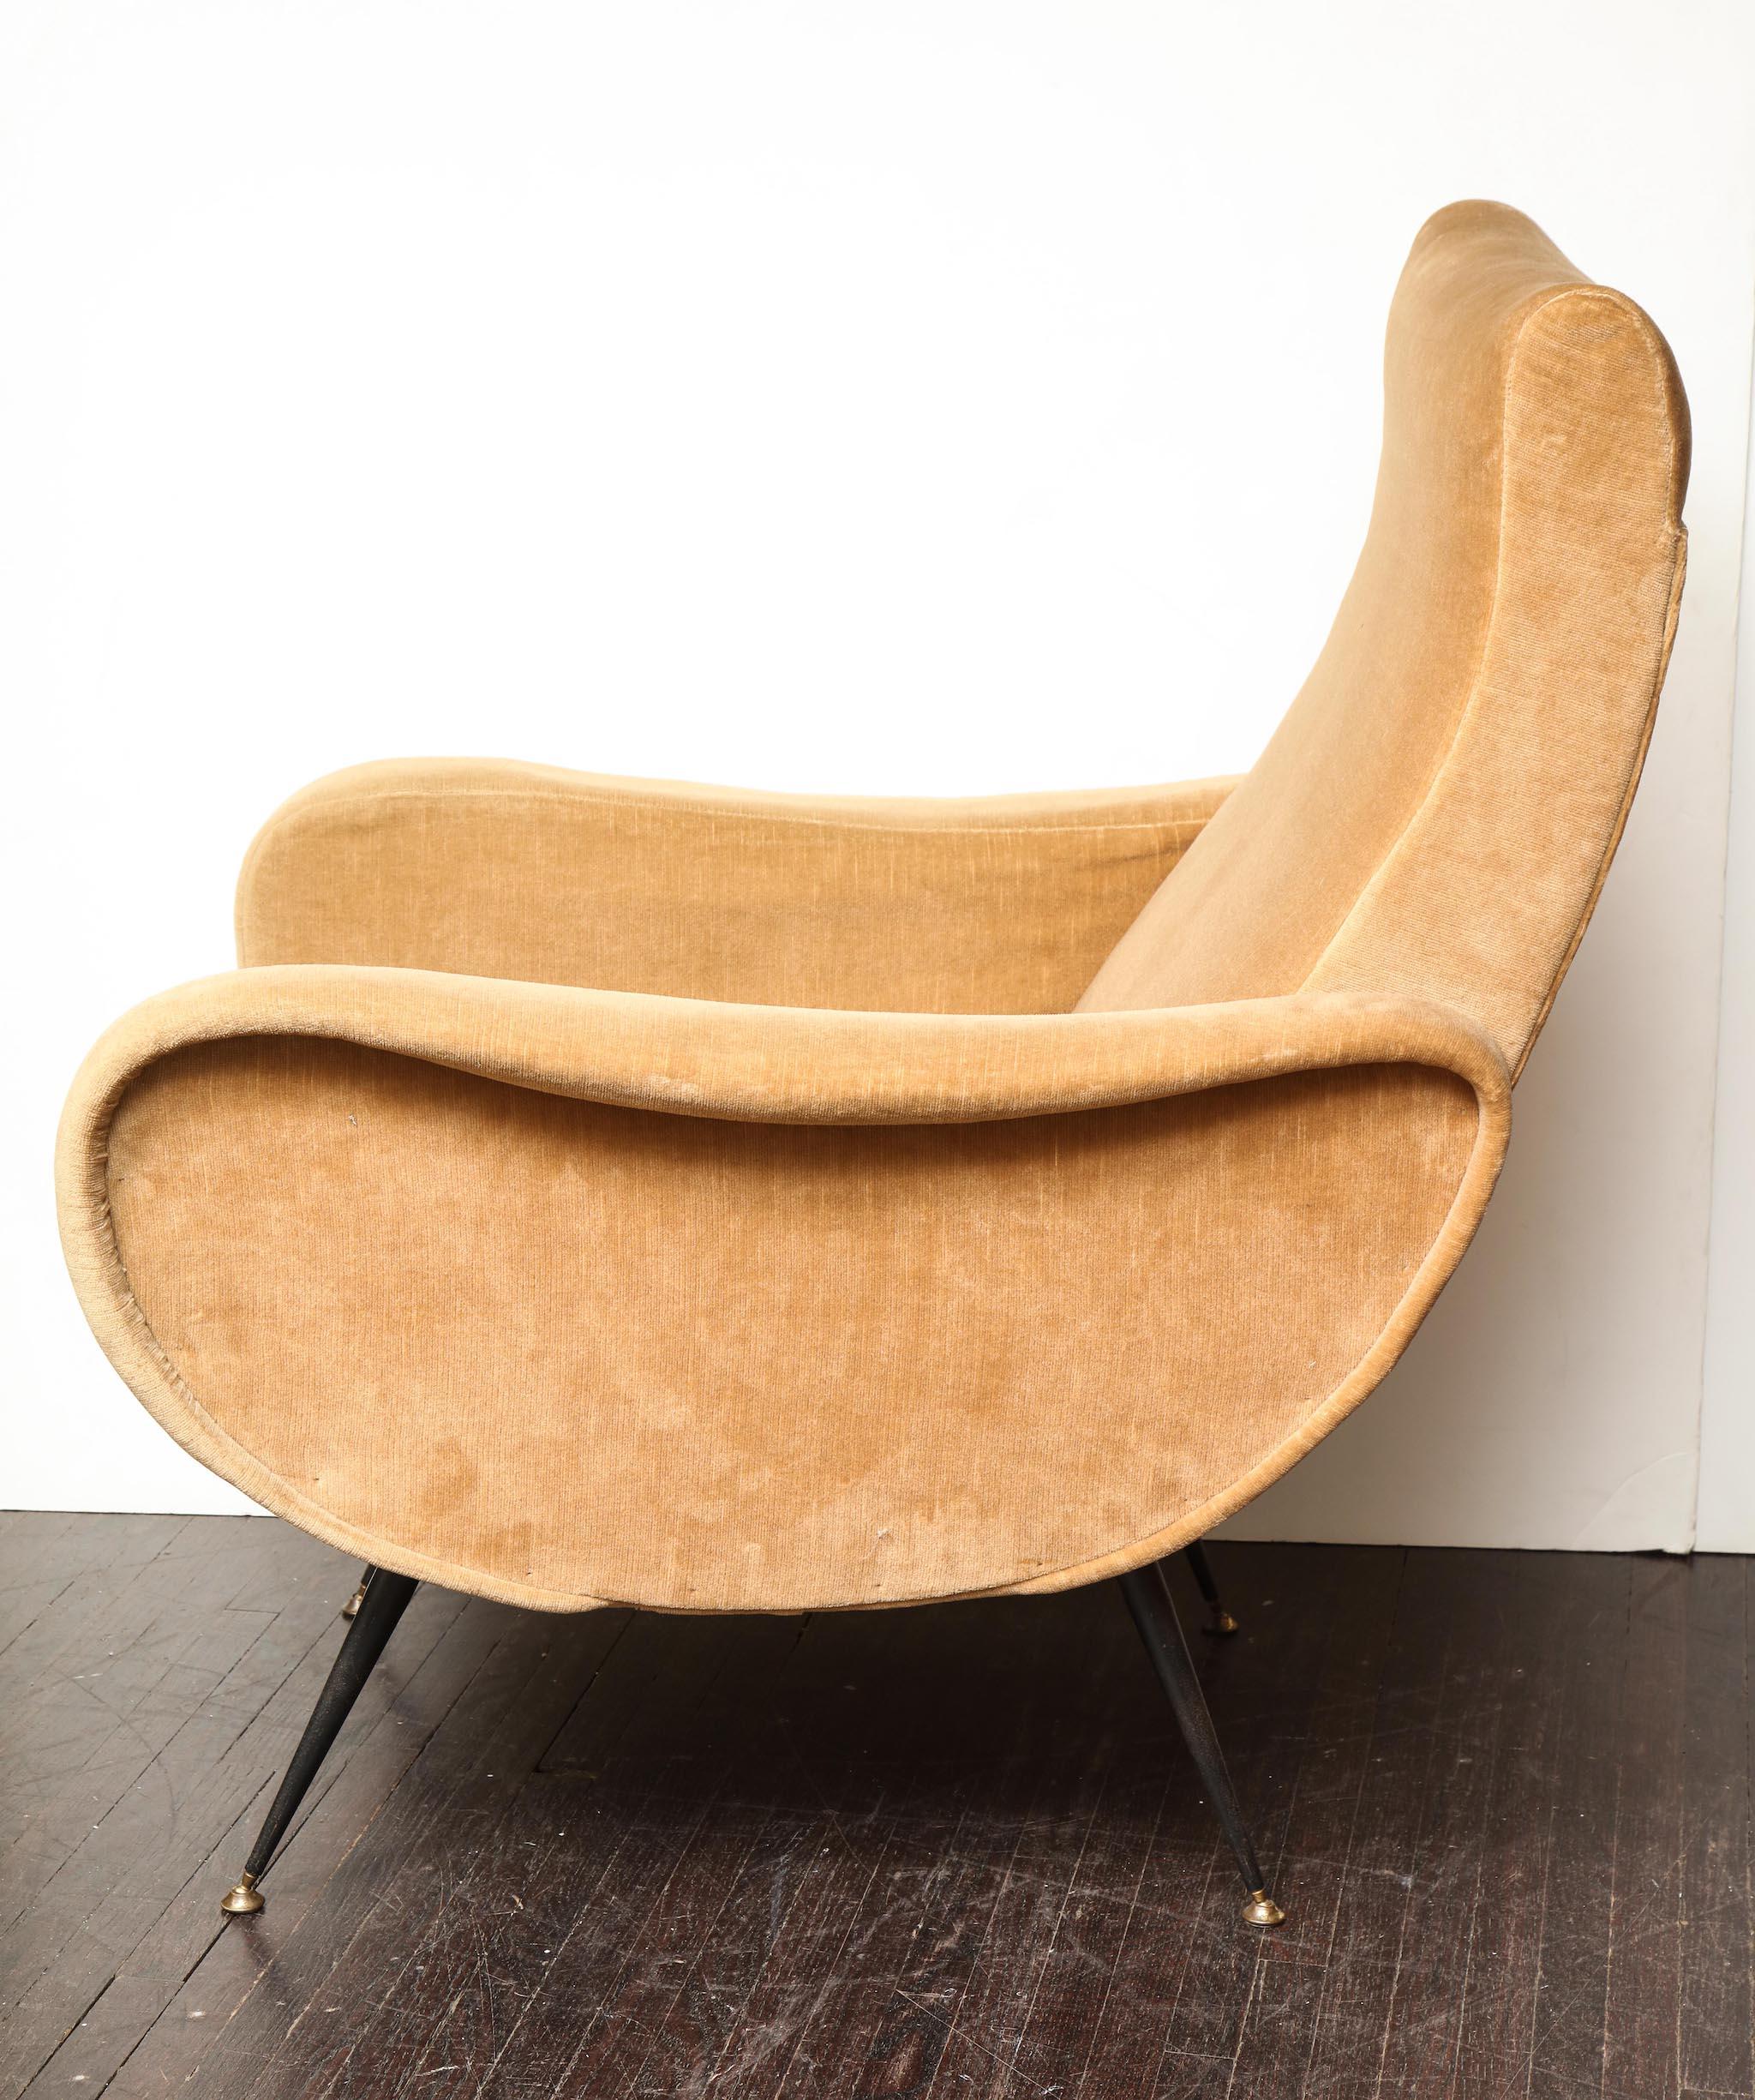 Vintage Italian Lounge Chairs in the Manner of Marco Zanuso (Italienisch)